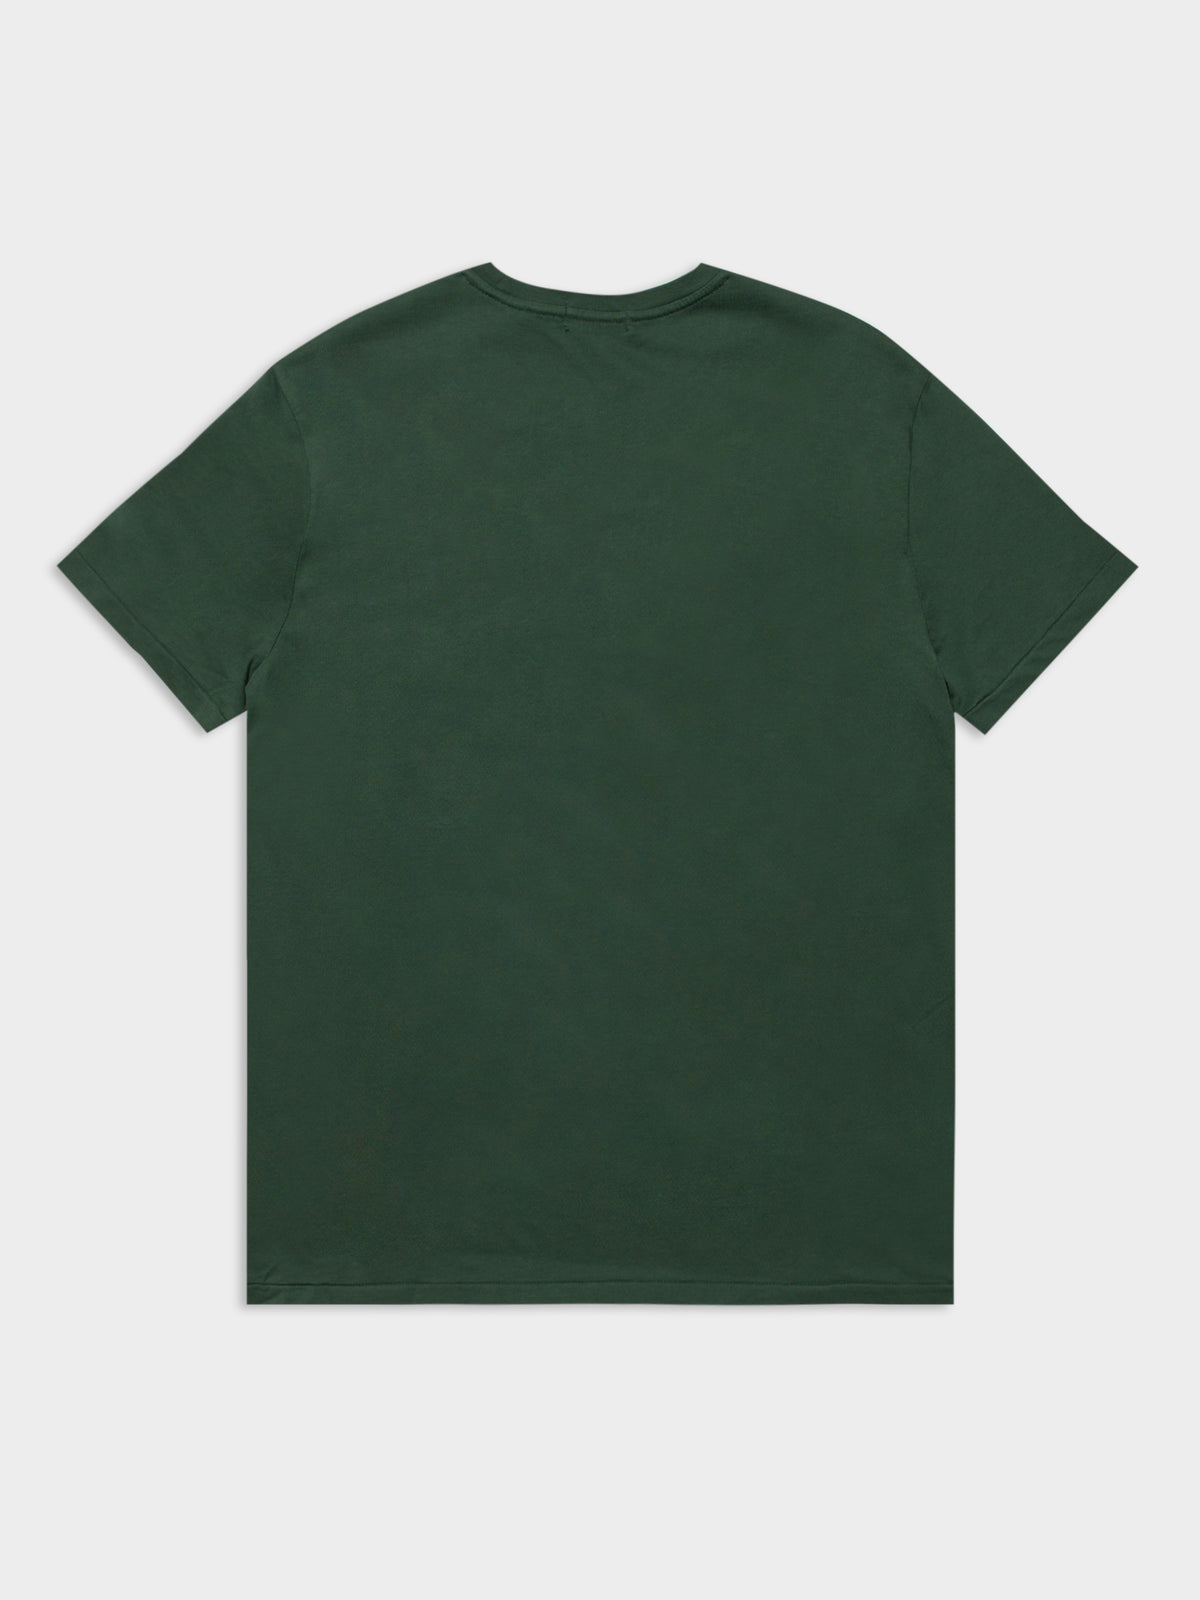 Polo Bear T-Shirt in Washed Forest